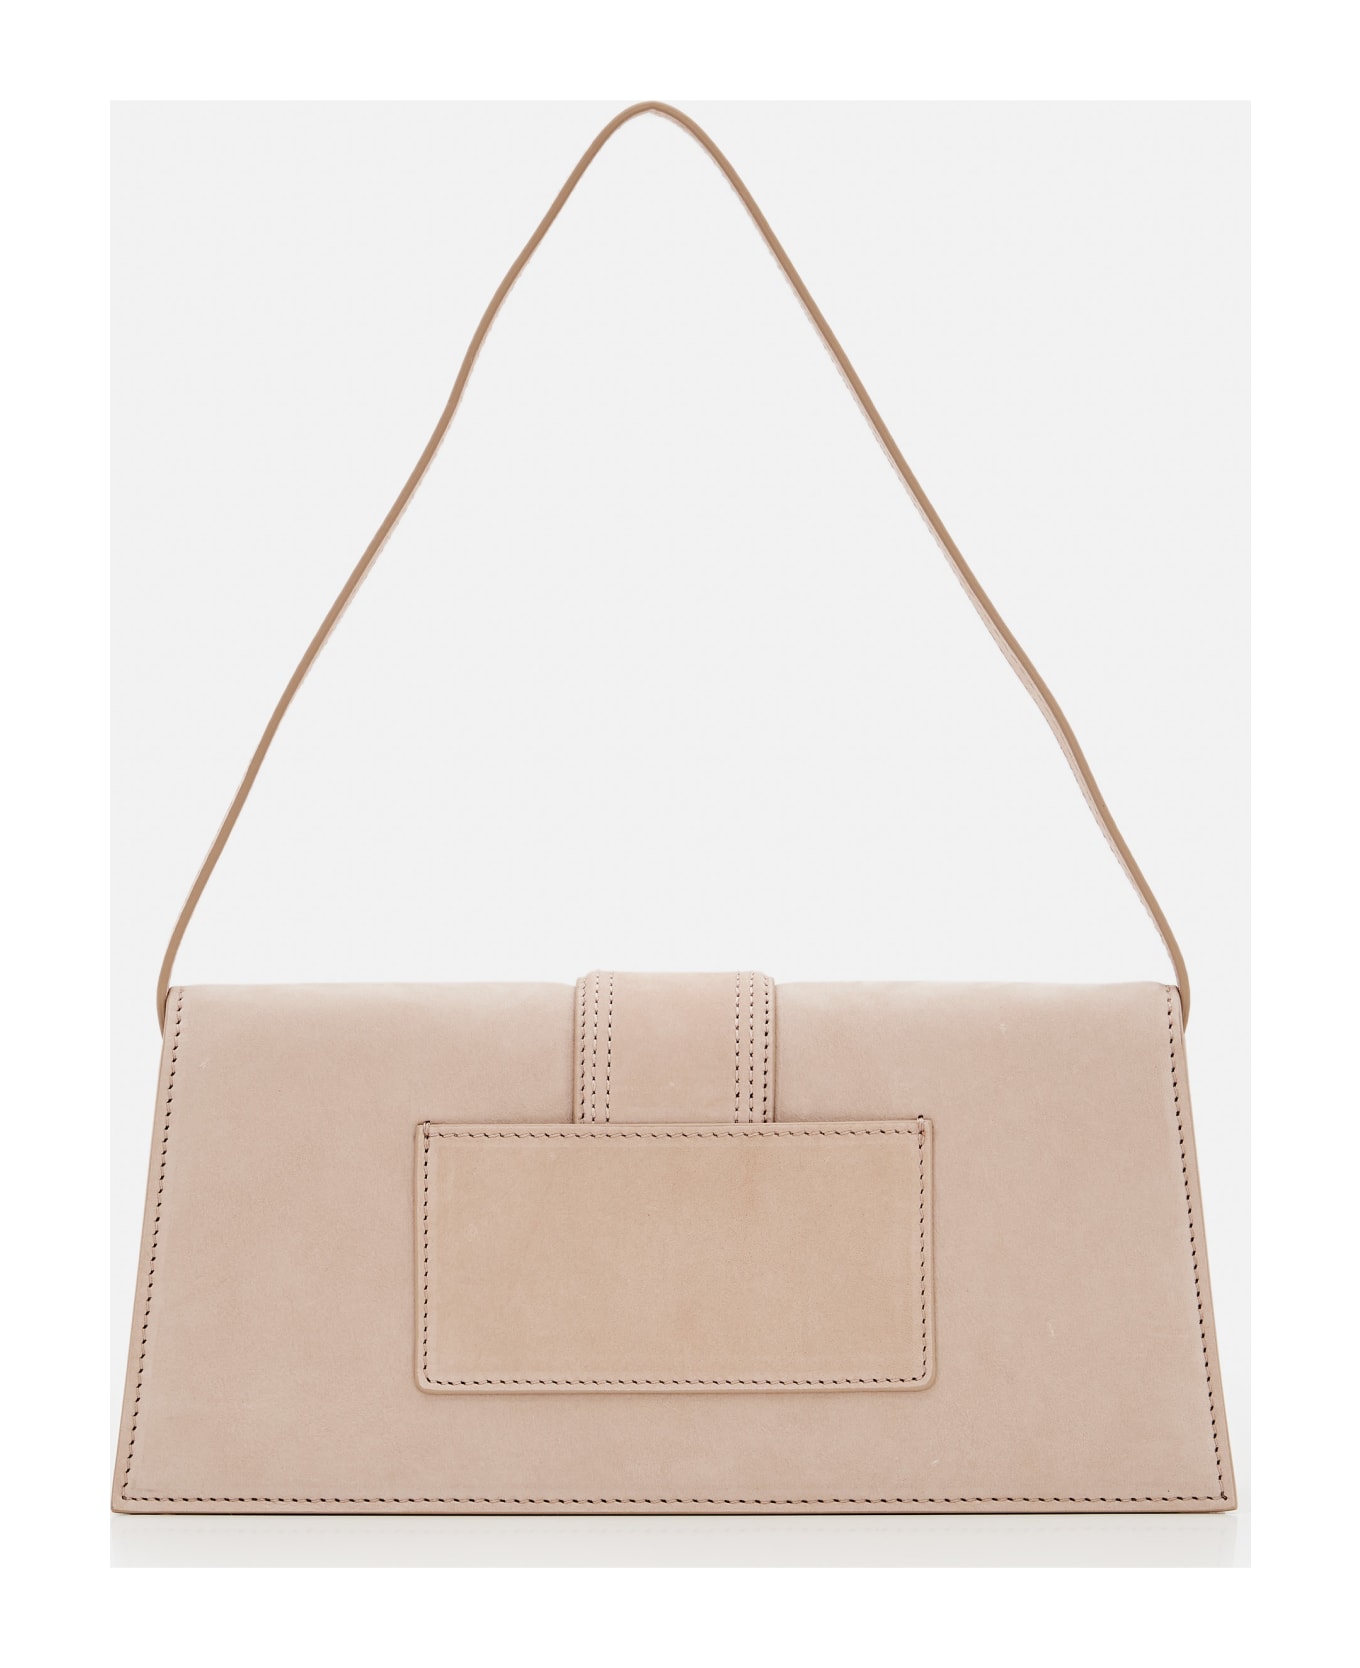 Jacquemus Le Bambino Leather Shoulder Bag - Beige ショルダーバッグ